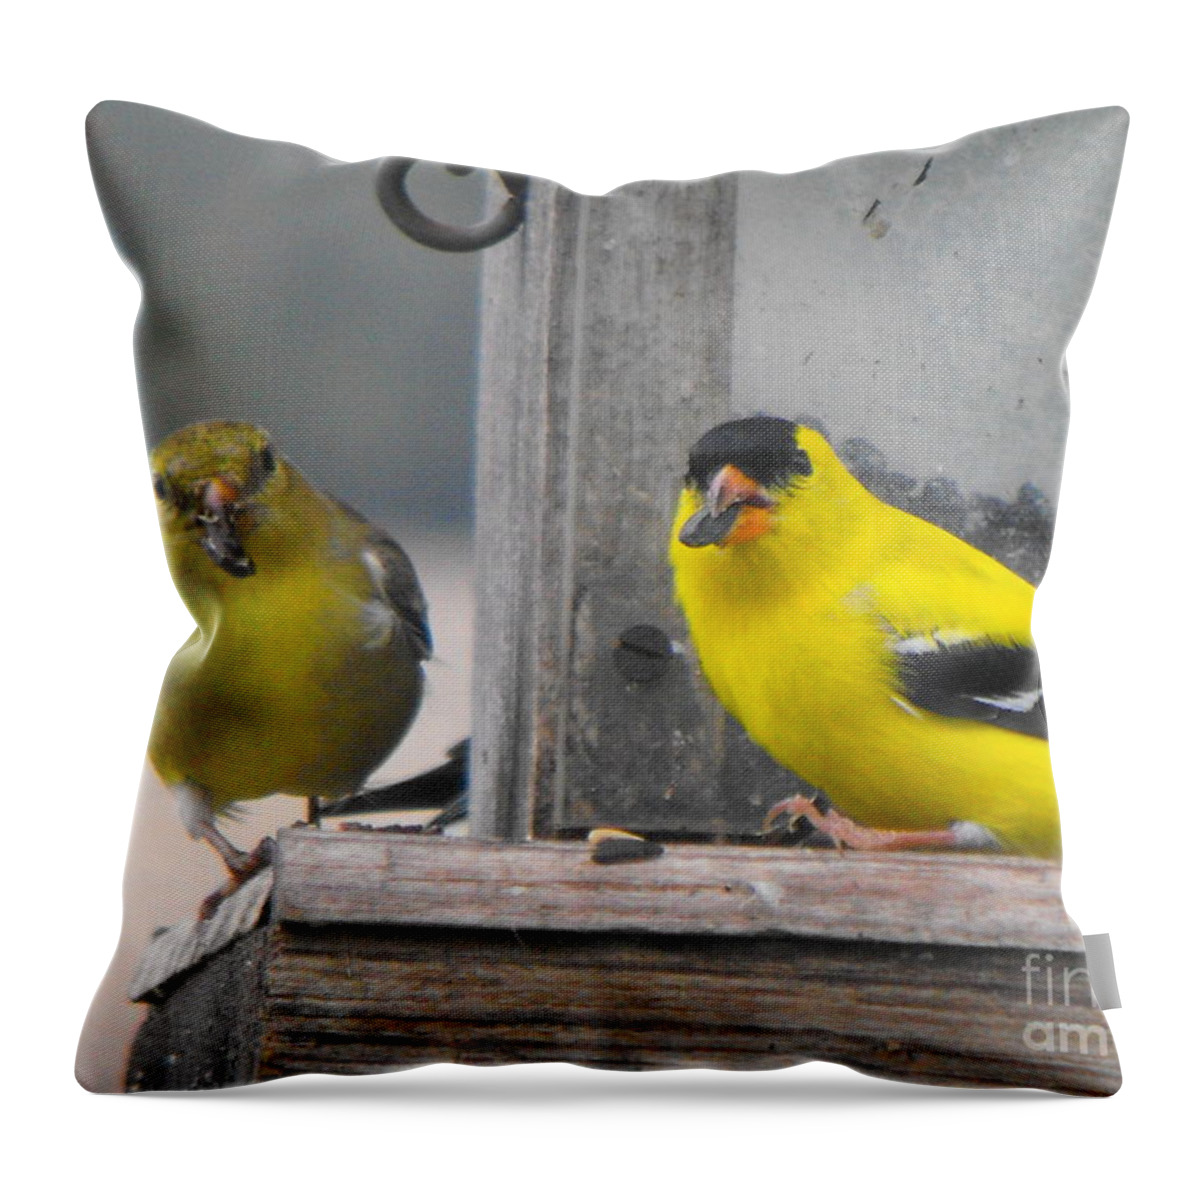 Canary Throw Pillow featuring the photograph Yellow Birds by Erick Schmidt